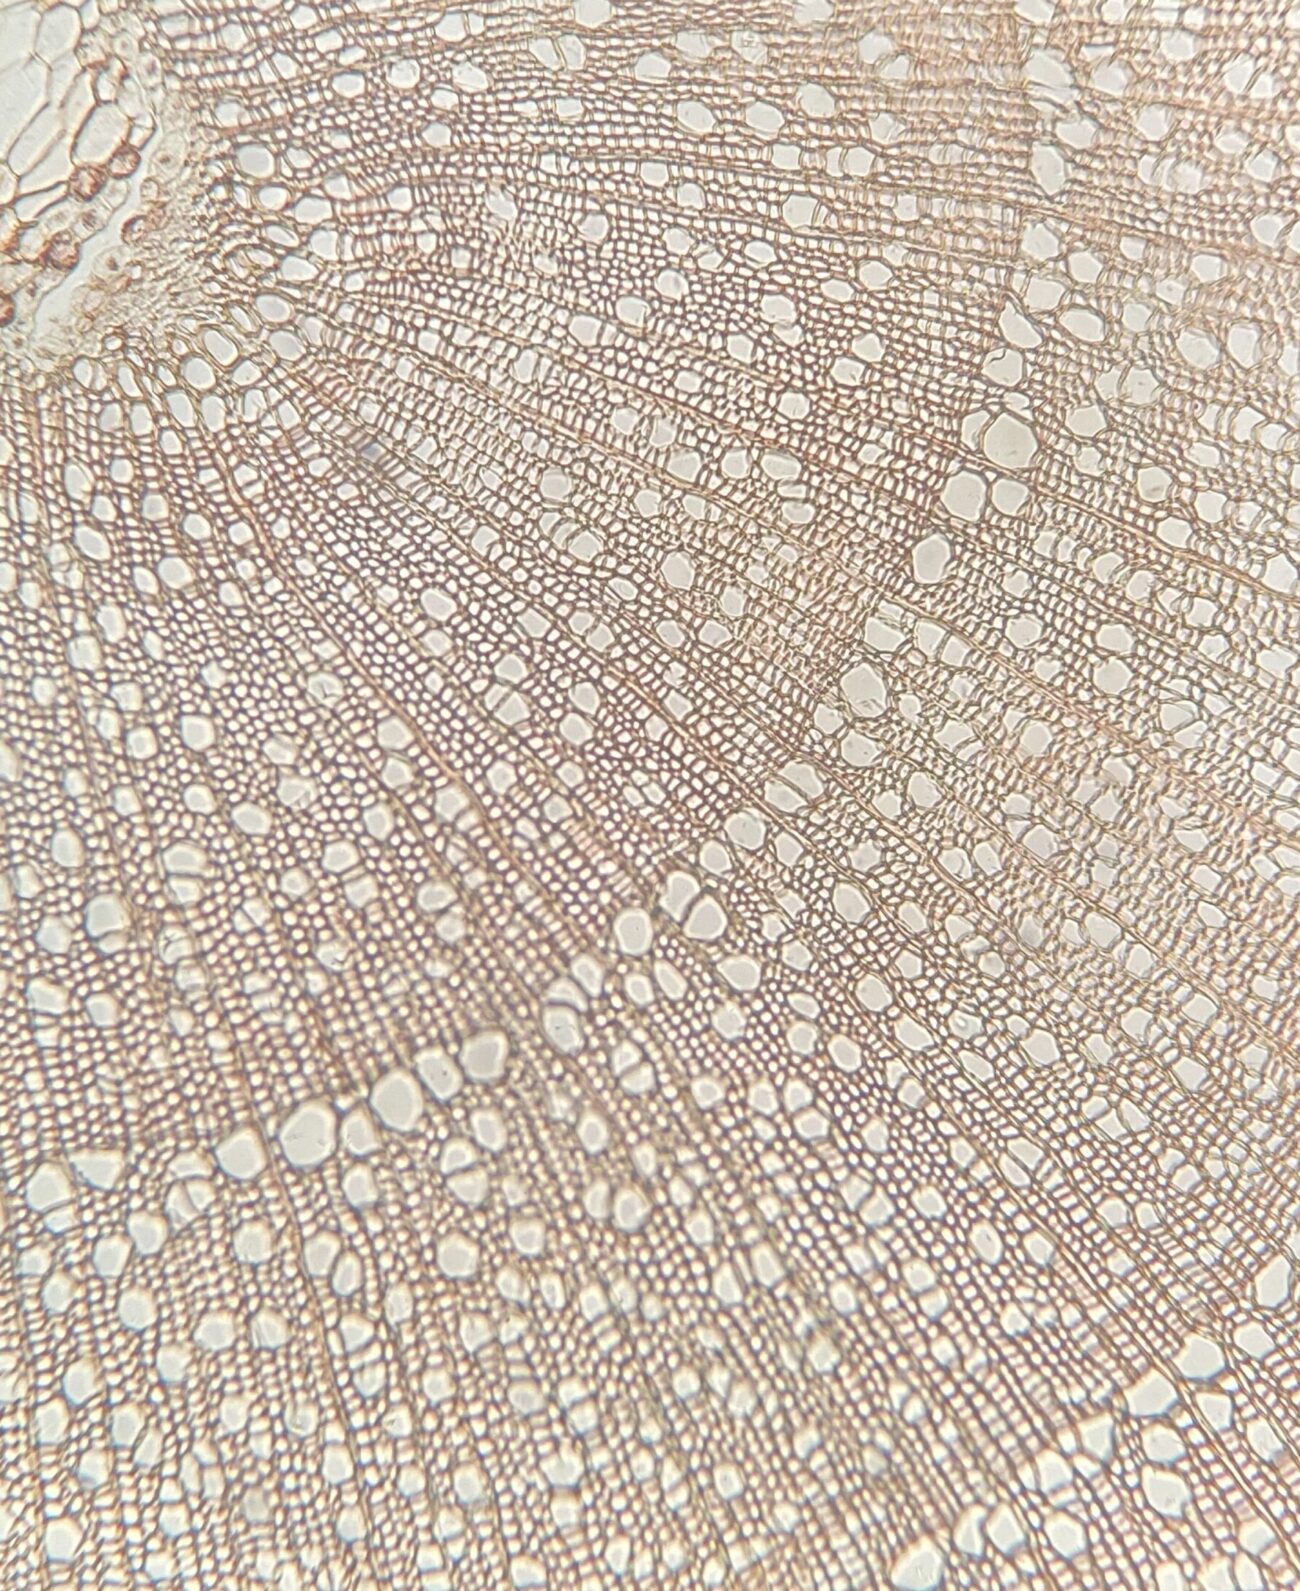 microscopic photo of pine wood structure